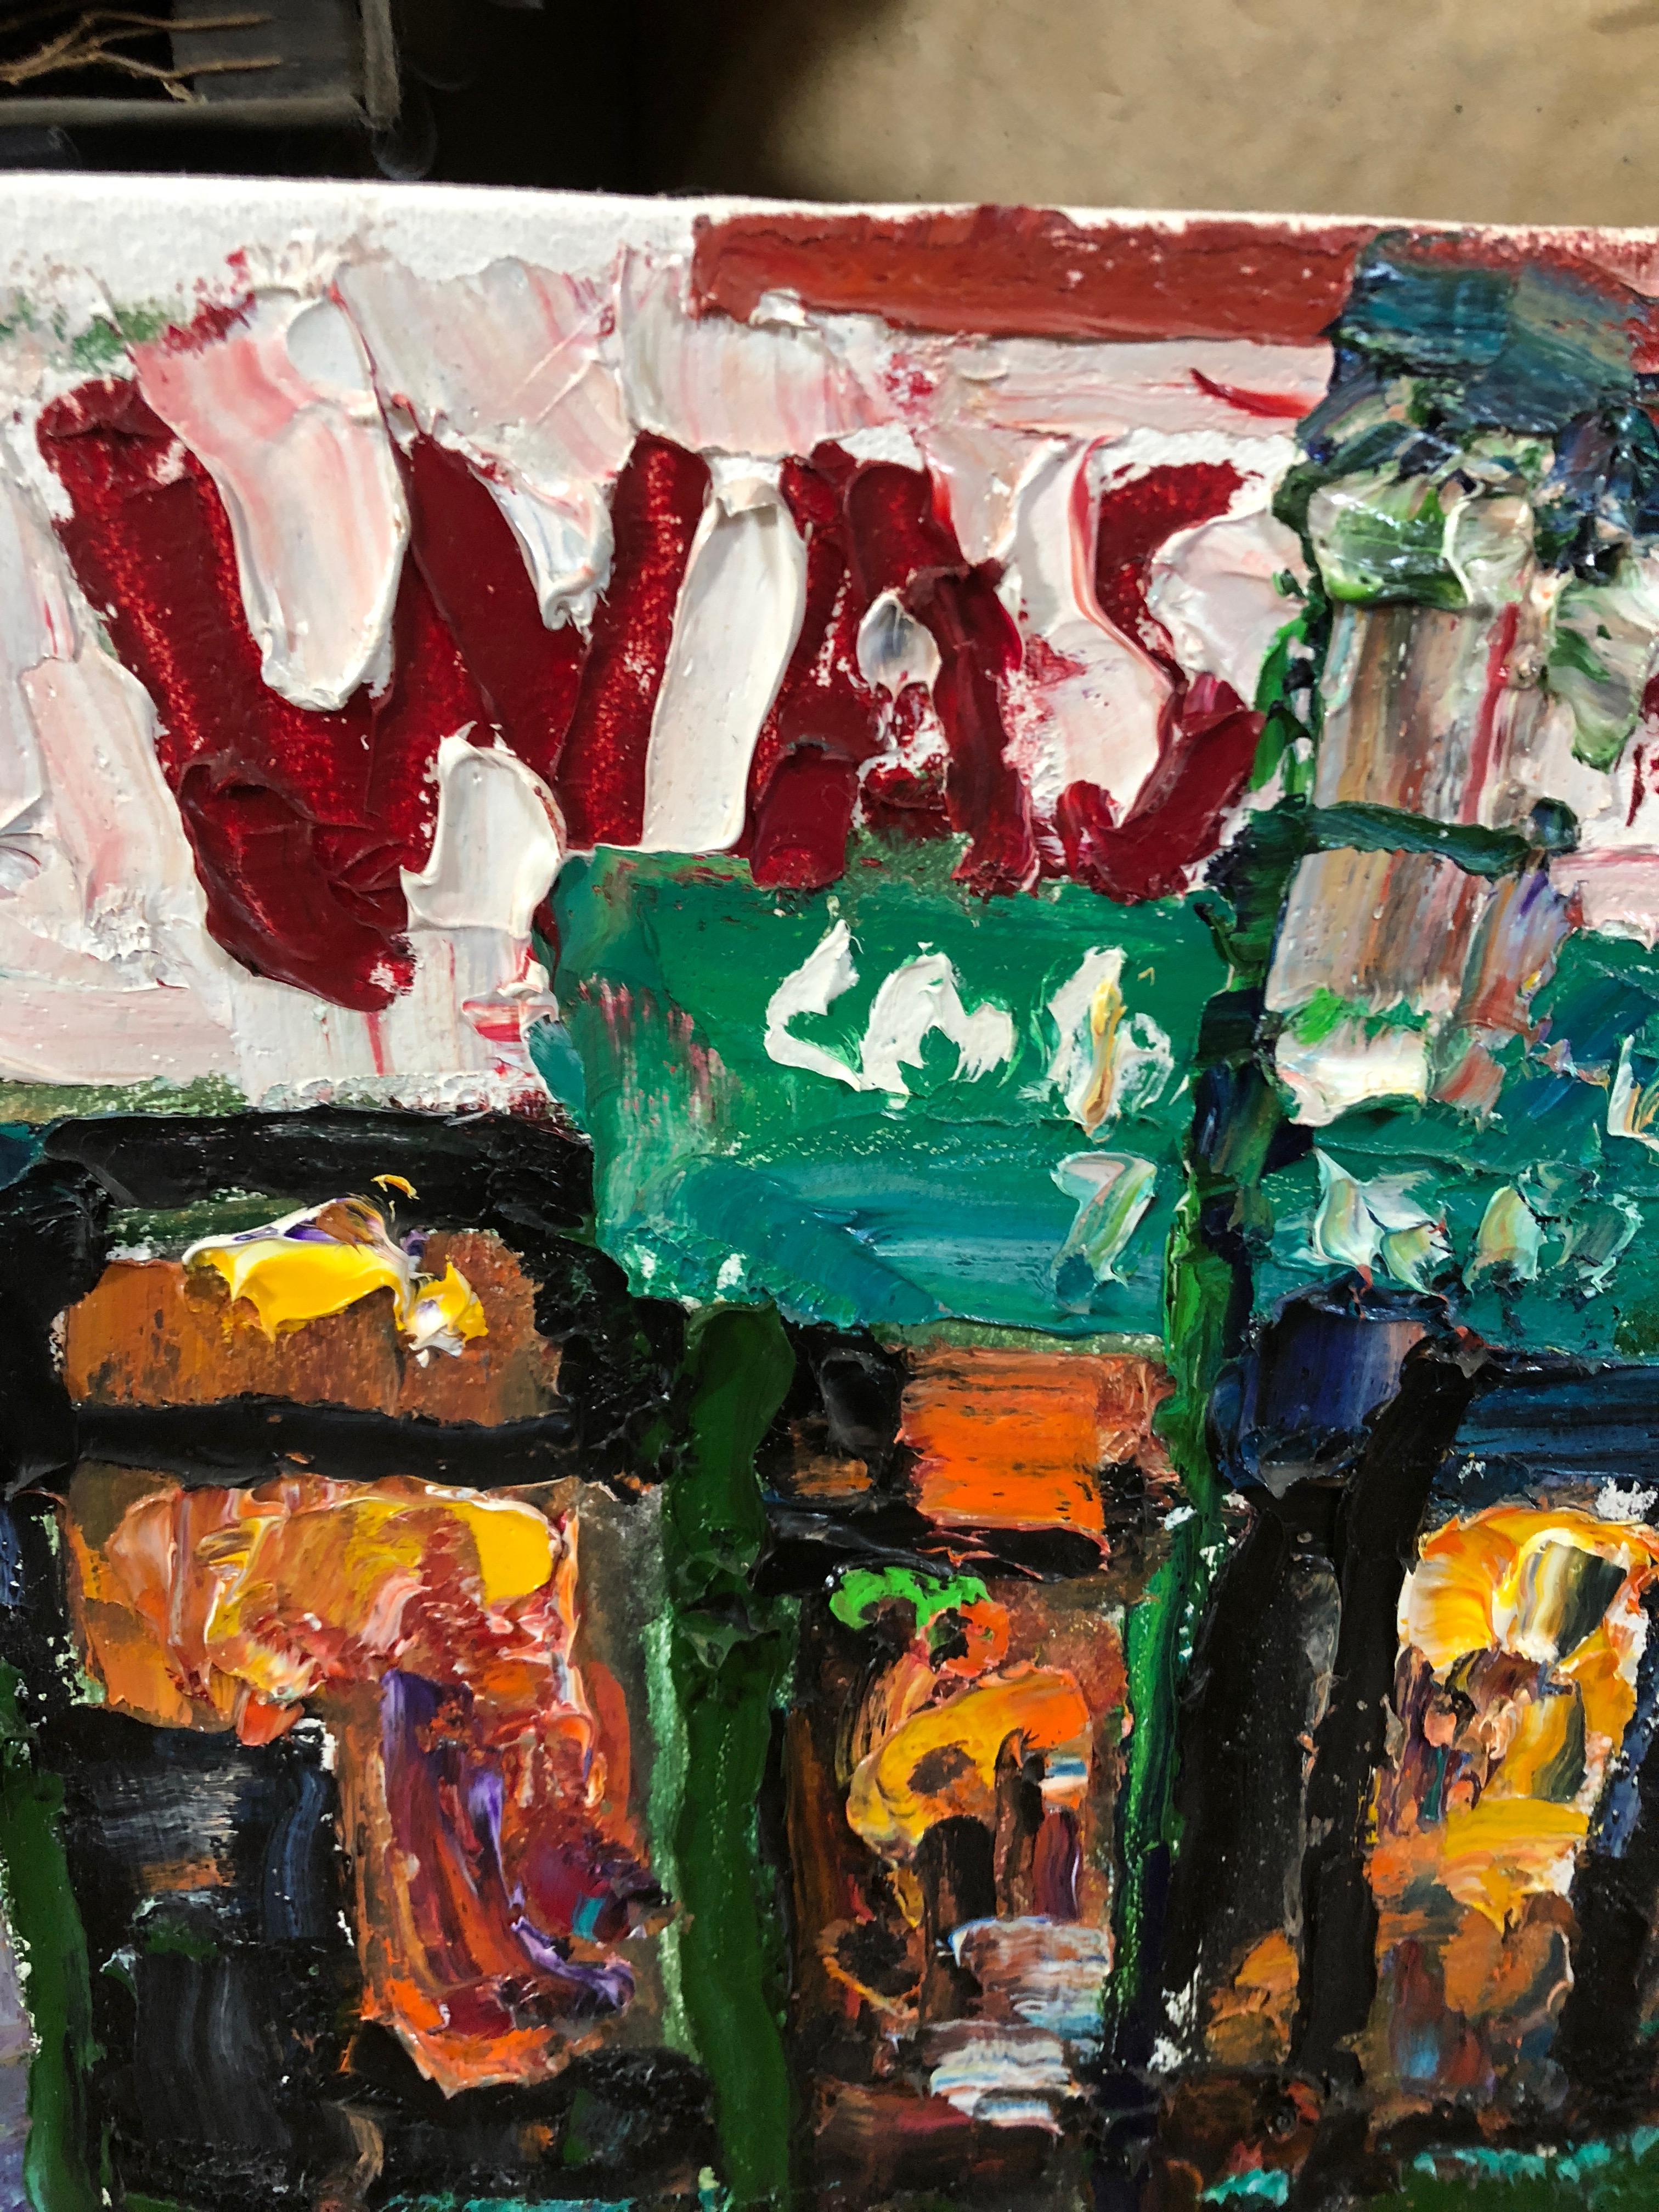 Wonderful very painterly plein air painting of a New York City street with a prominent graphic laundromat sign. Yummy rich impasto and incredible lively brushstrokes in this painting by renowned artist Ken McIndoe.